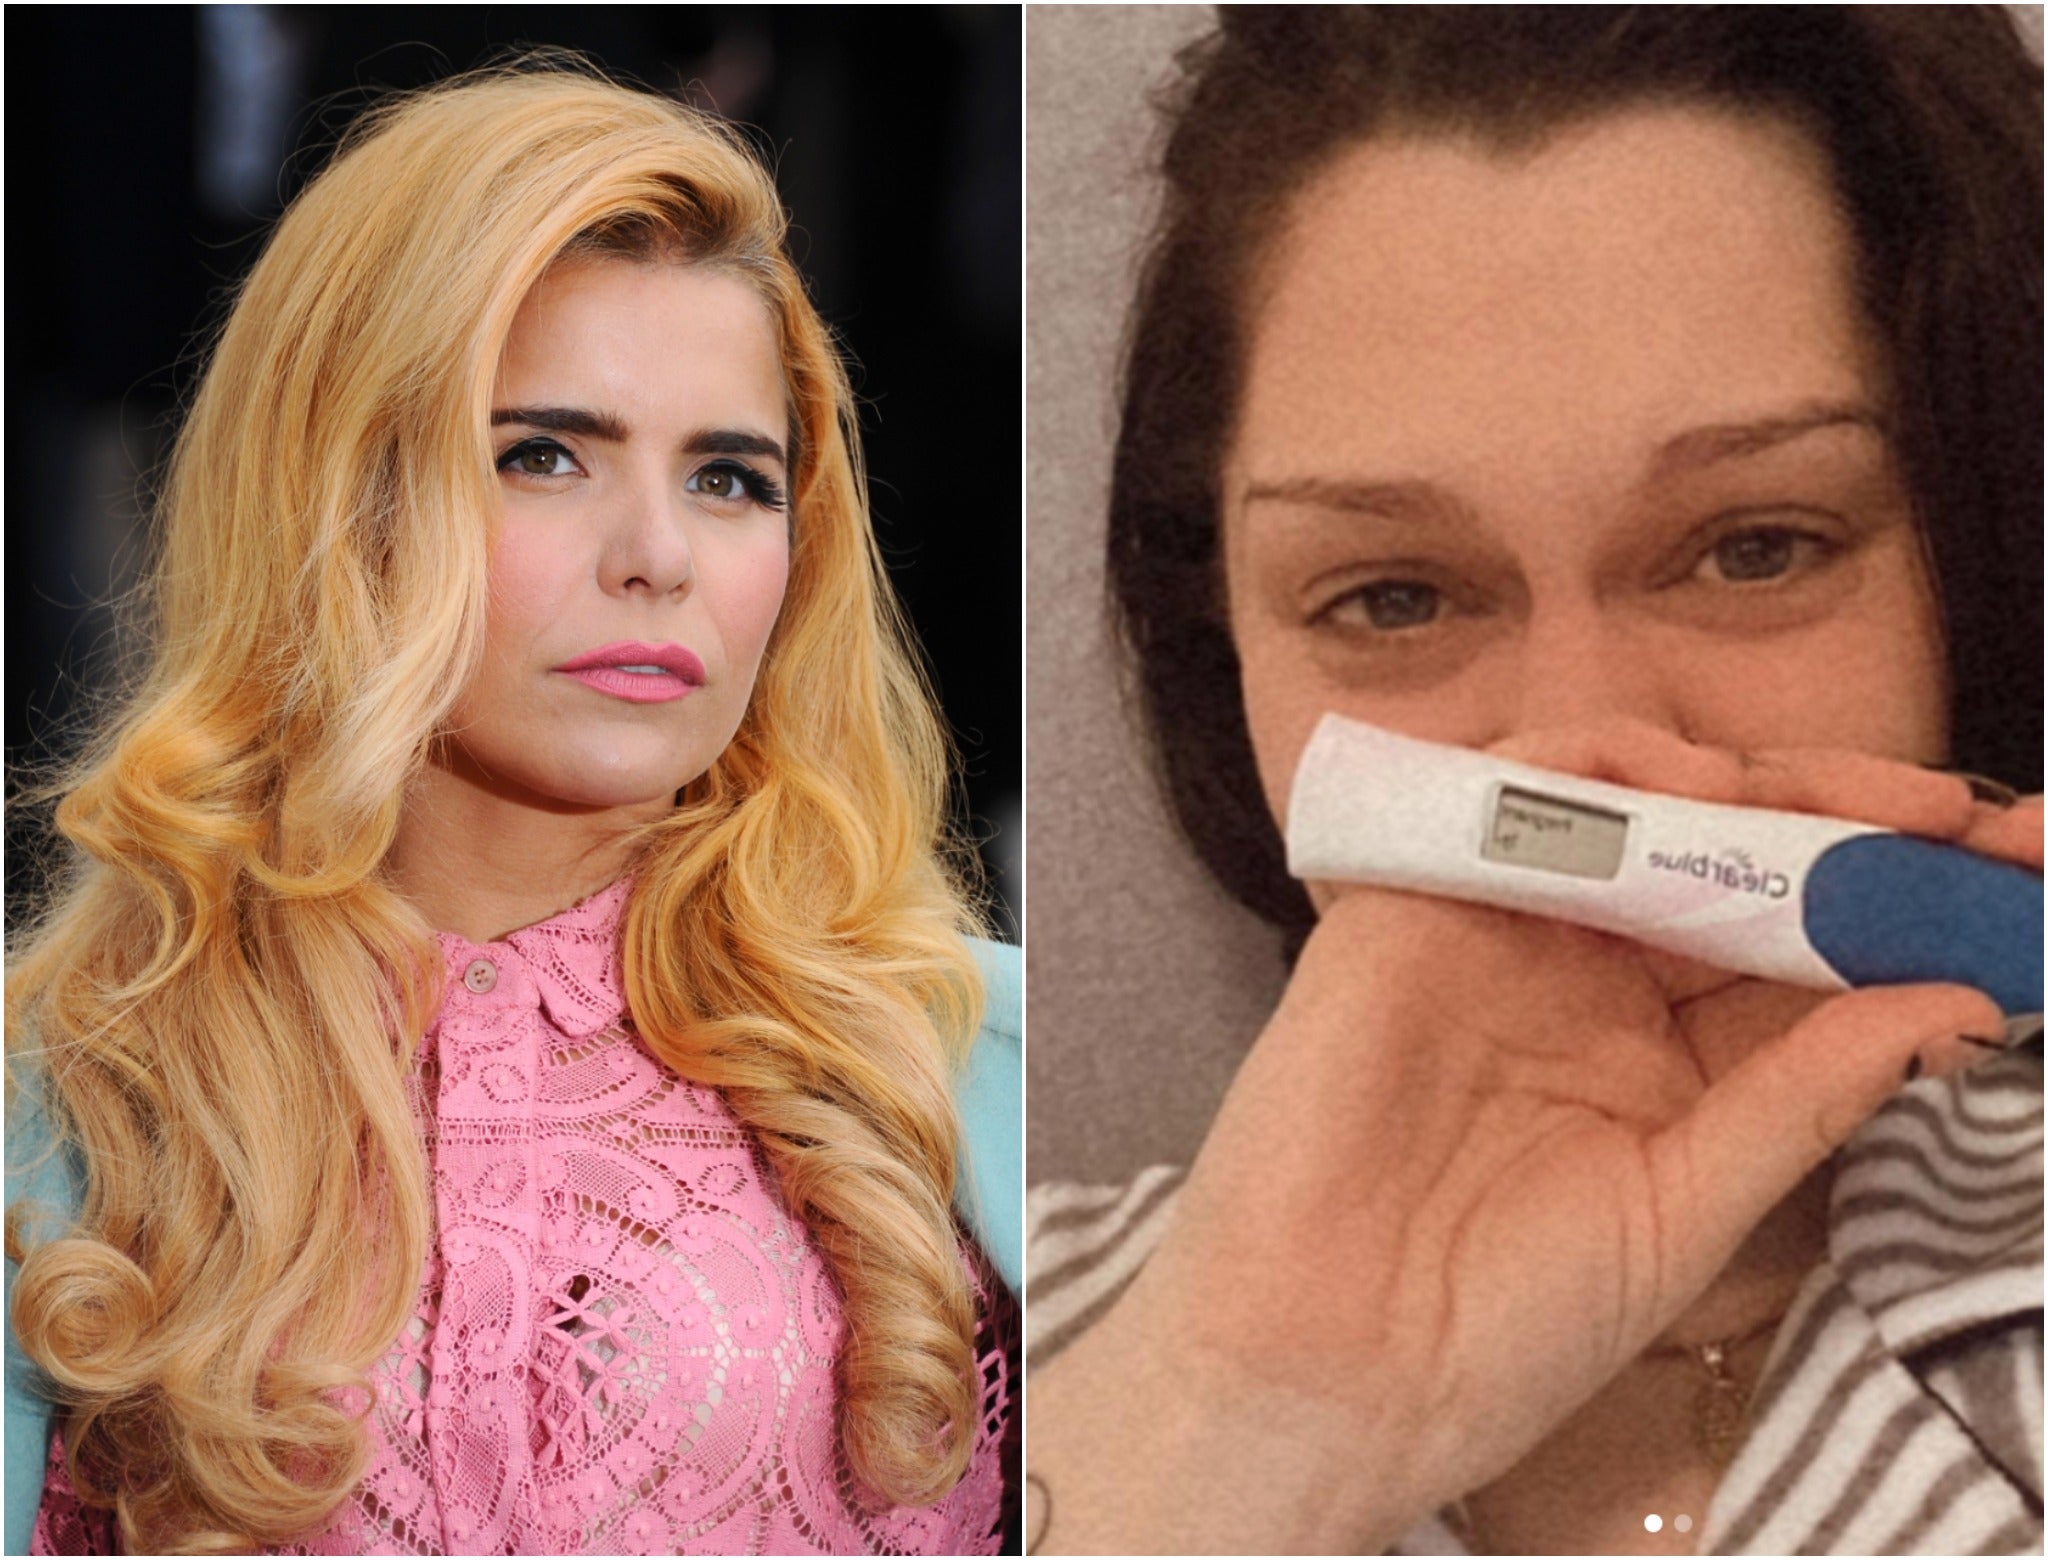 Paloma Faith sent a message of support to Jessie J